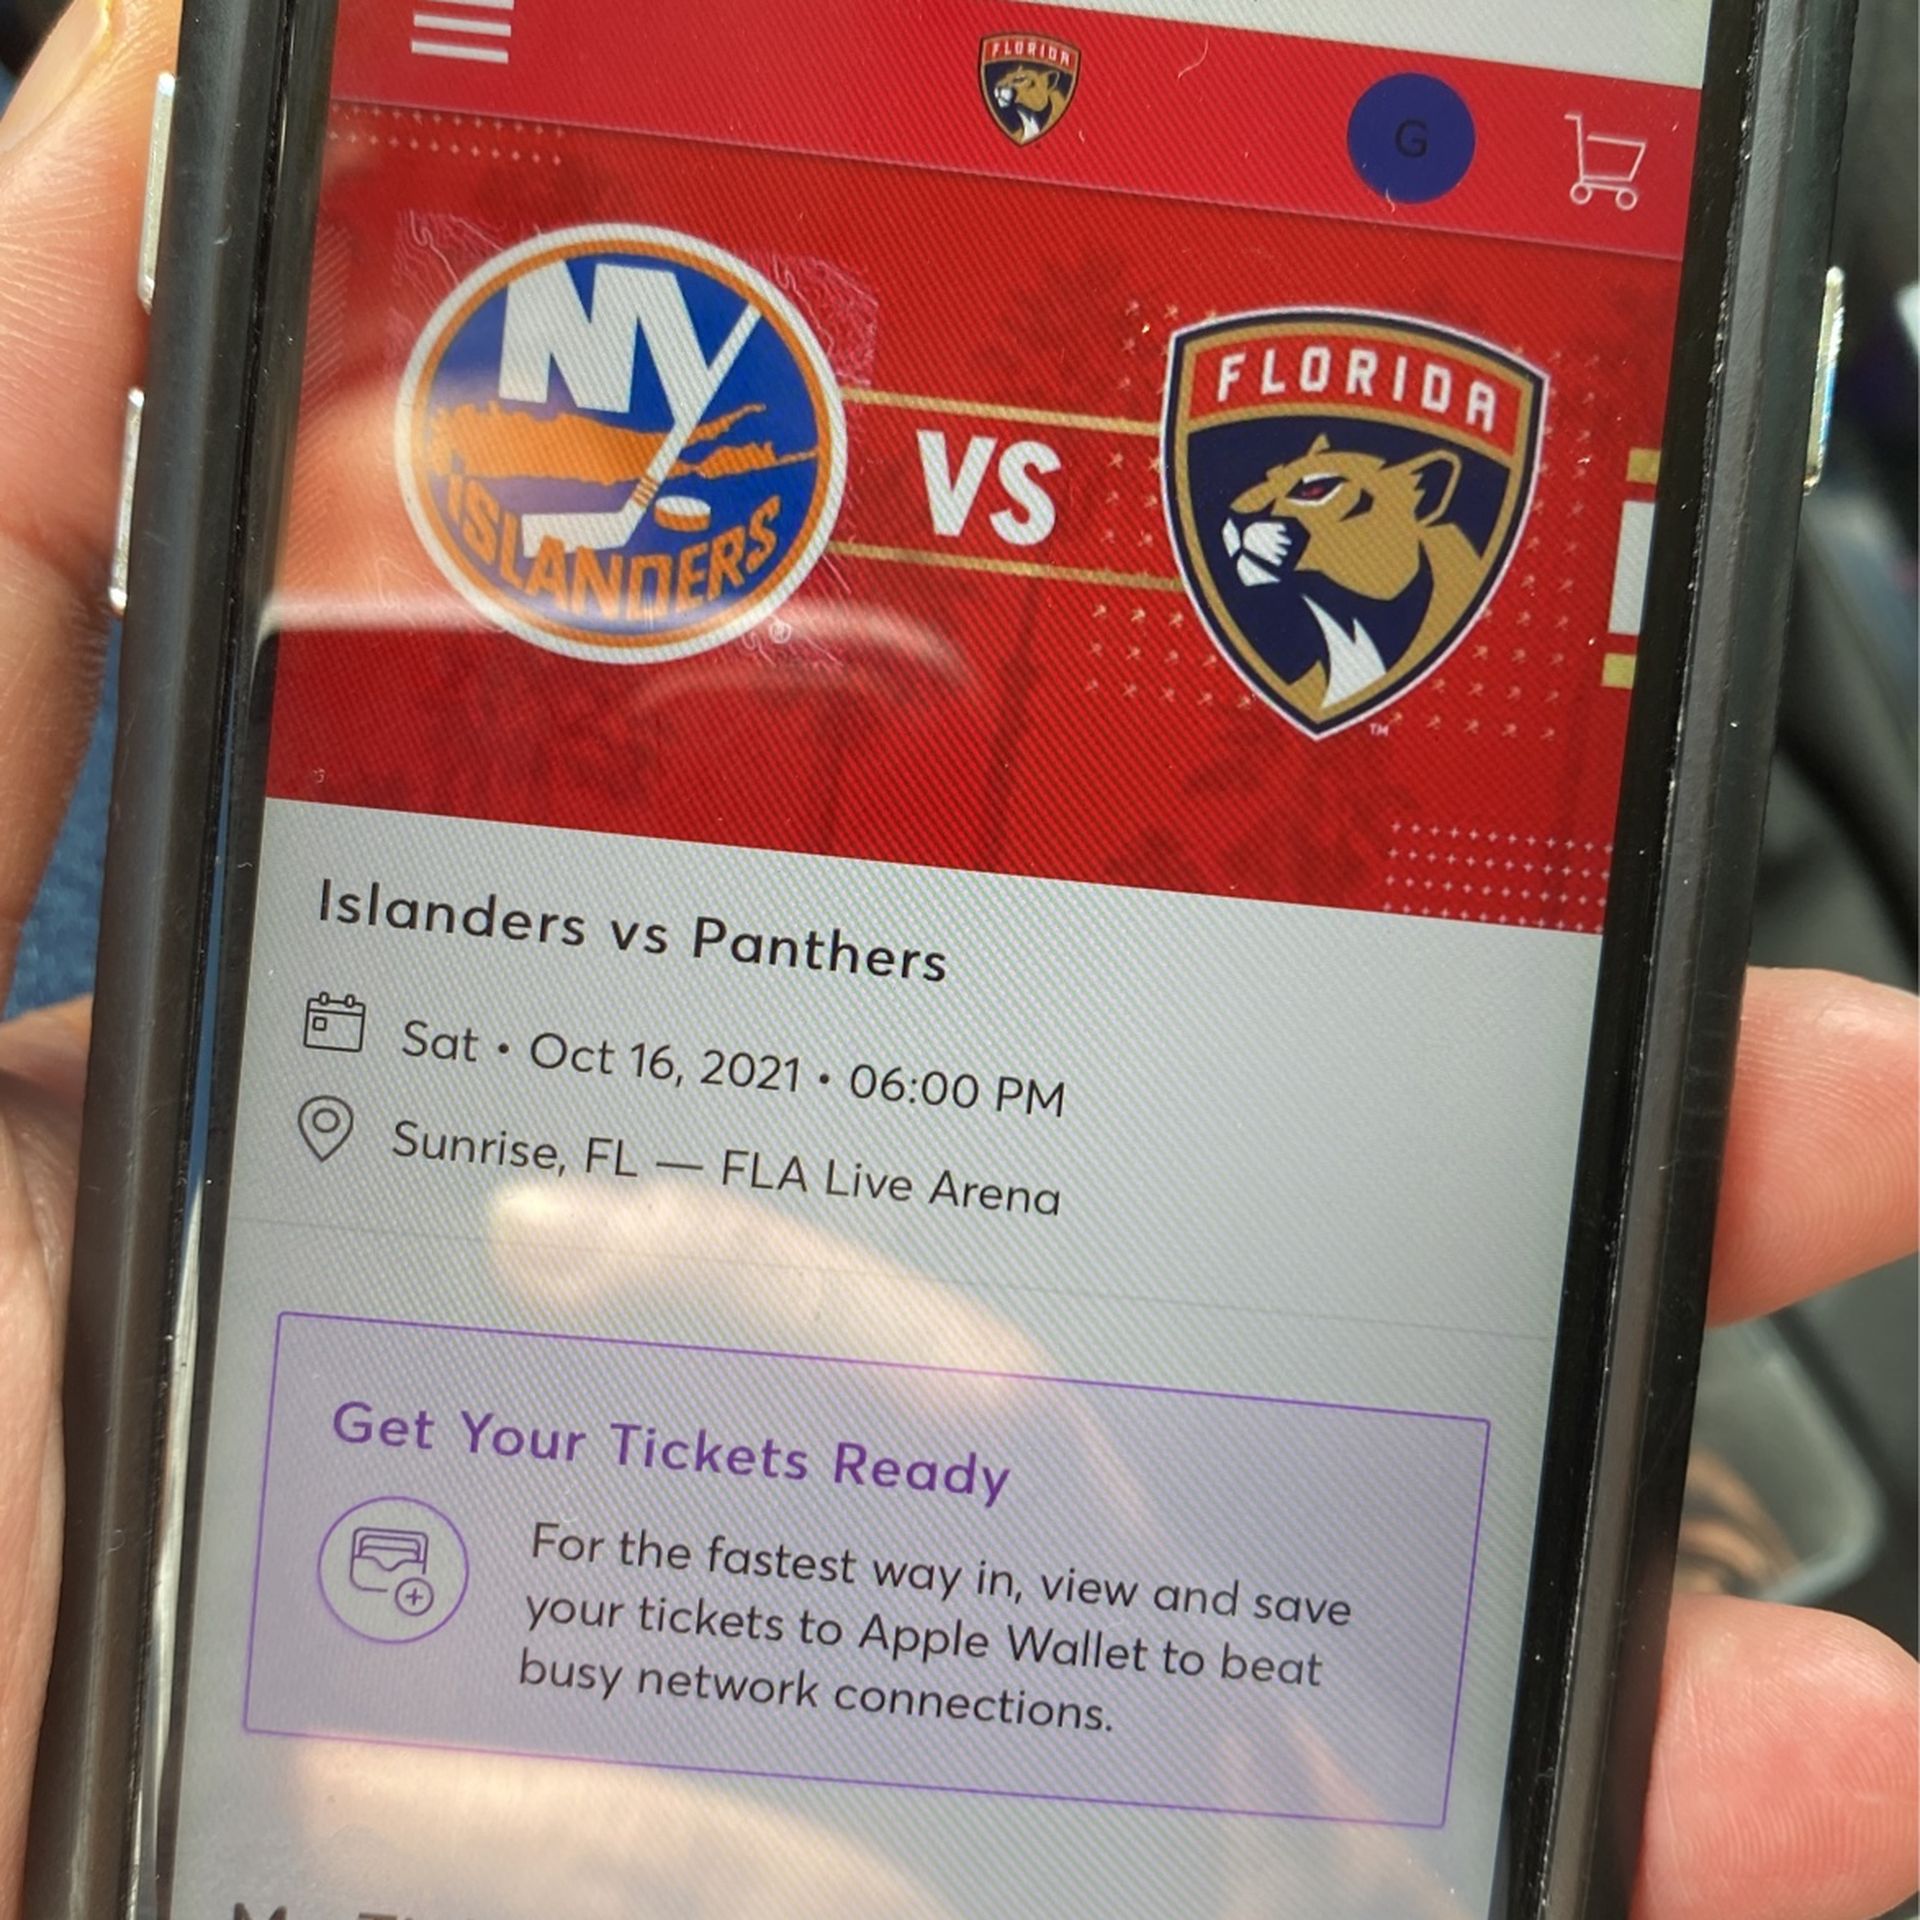 4 Tickets For Florida Panthers Vs NY Islanders $12 Each